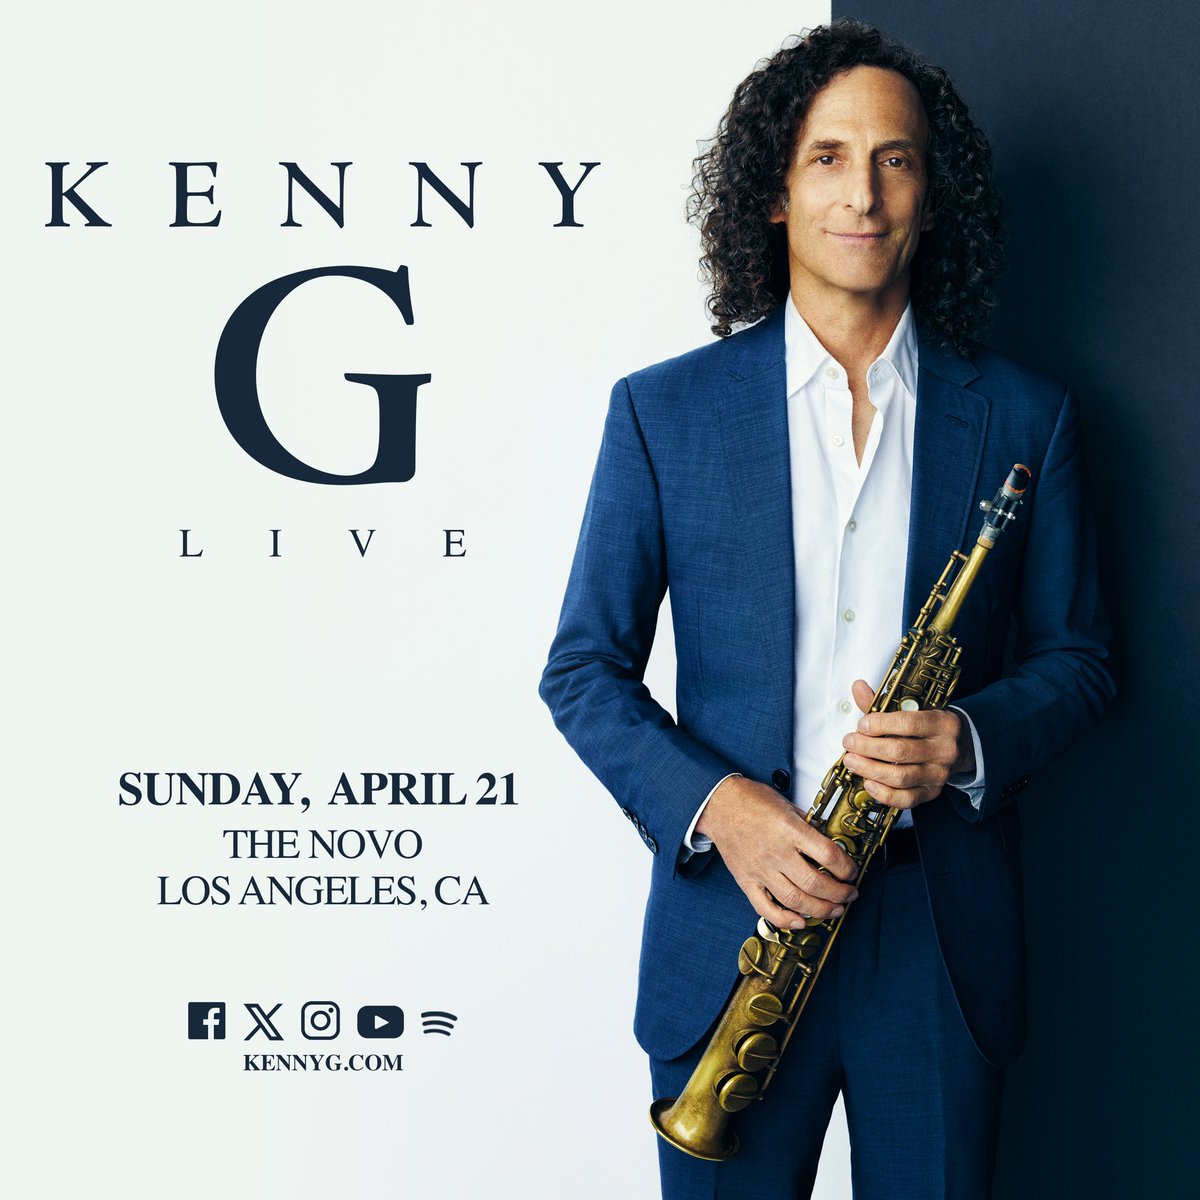 Los Angeles! I’ll be performing live at @TheNovoDTLA on April 21st. Tickets are available now. I’m looking forward to seeing you all for what will be an incredible night. kennyg.com/events